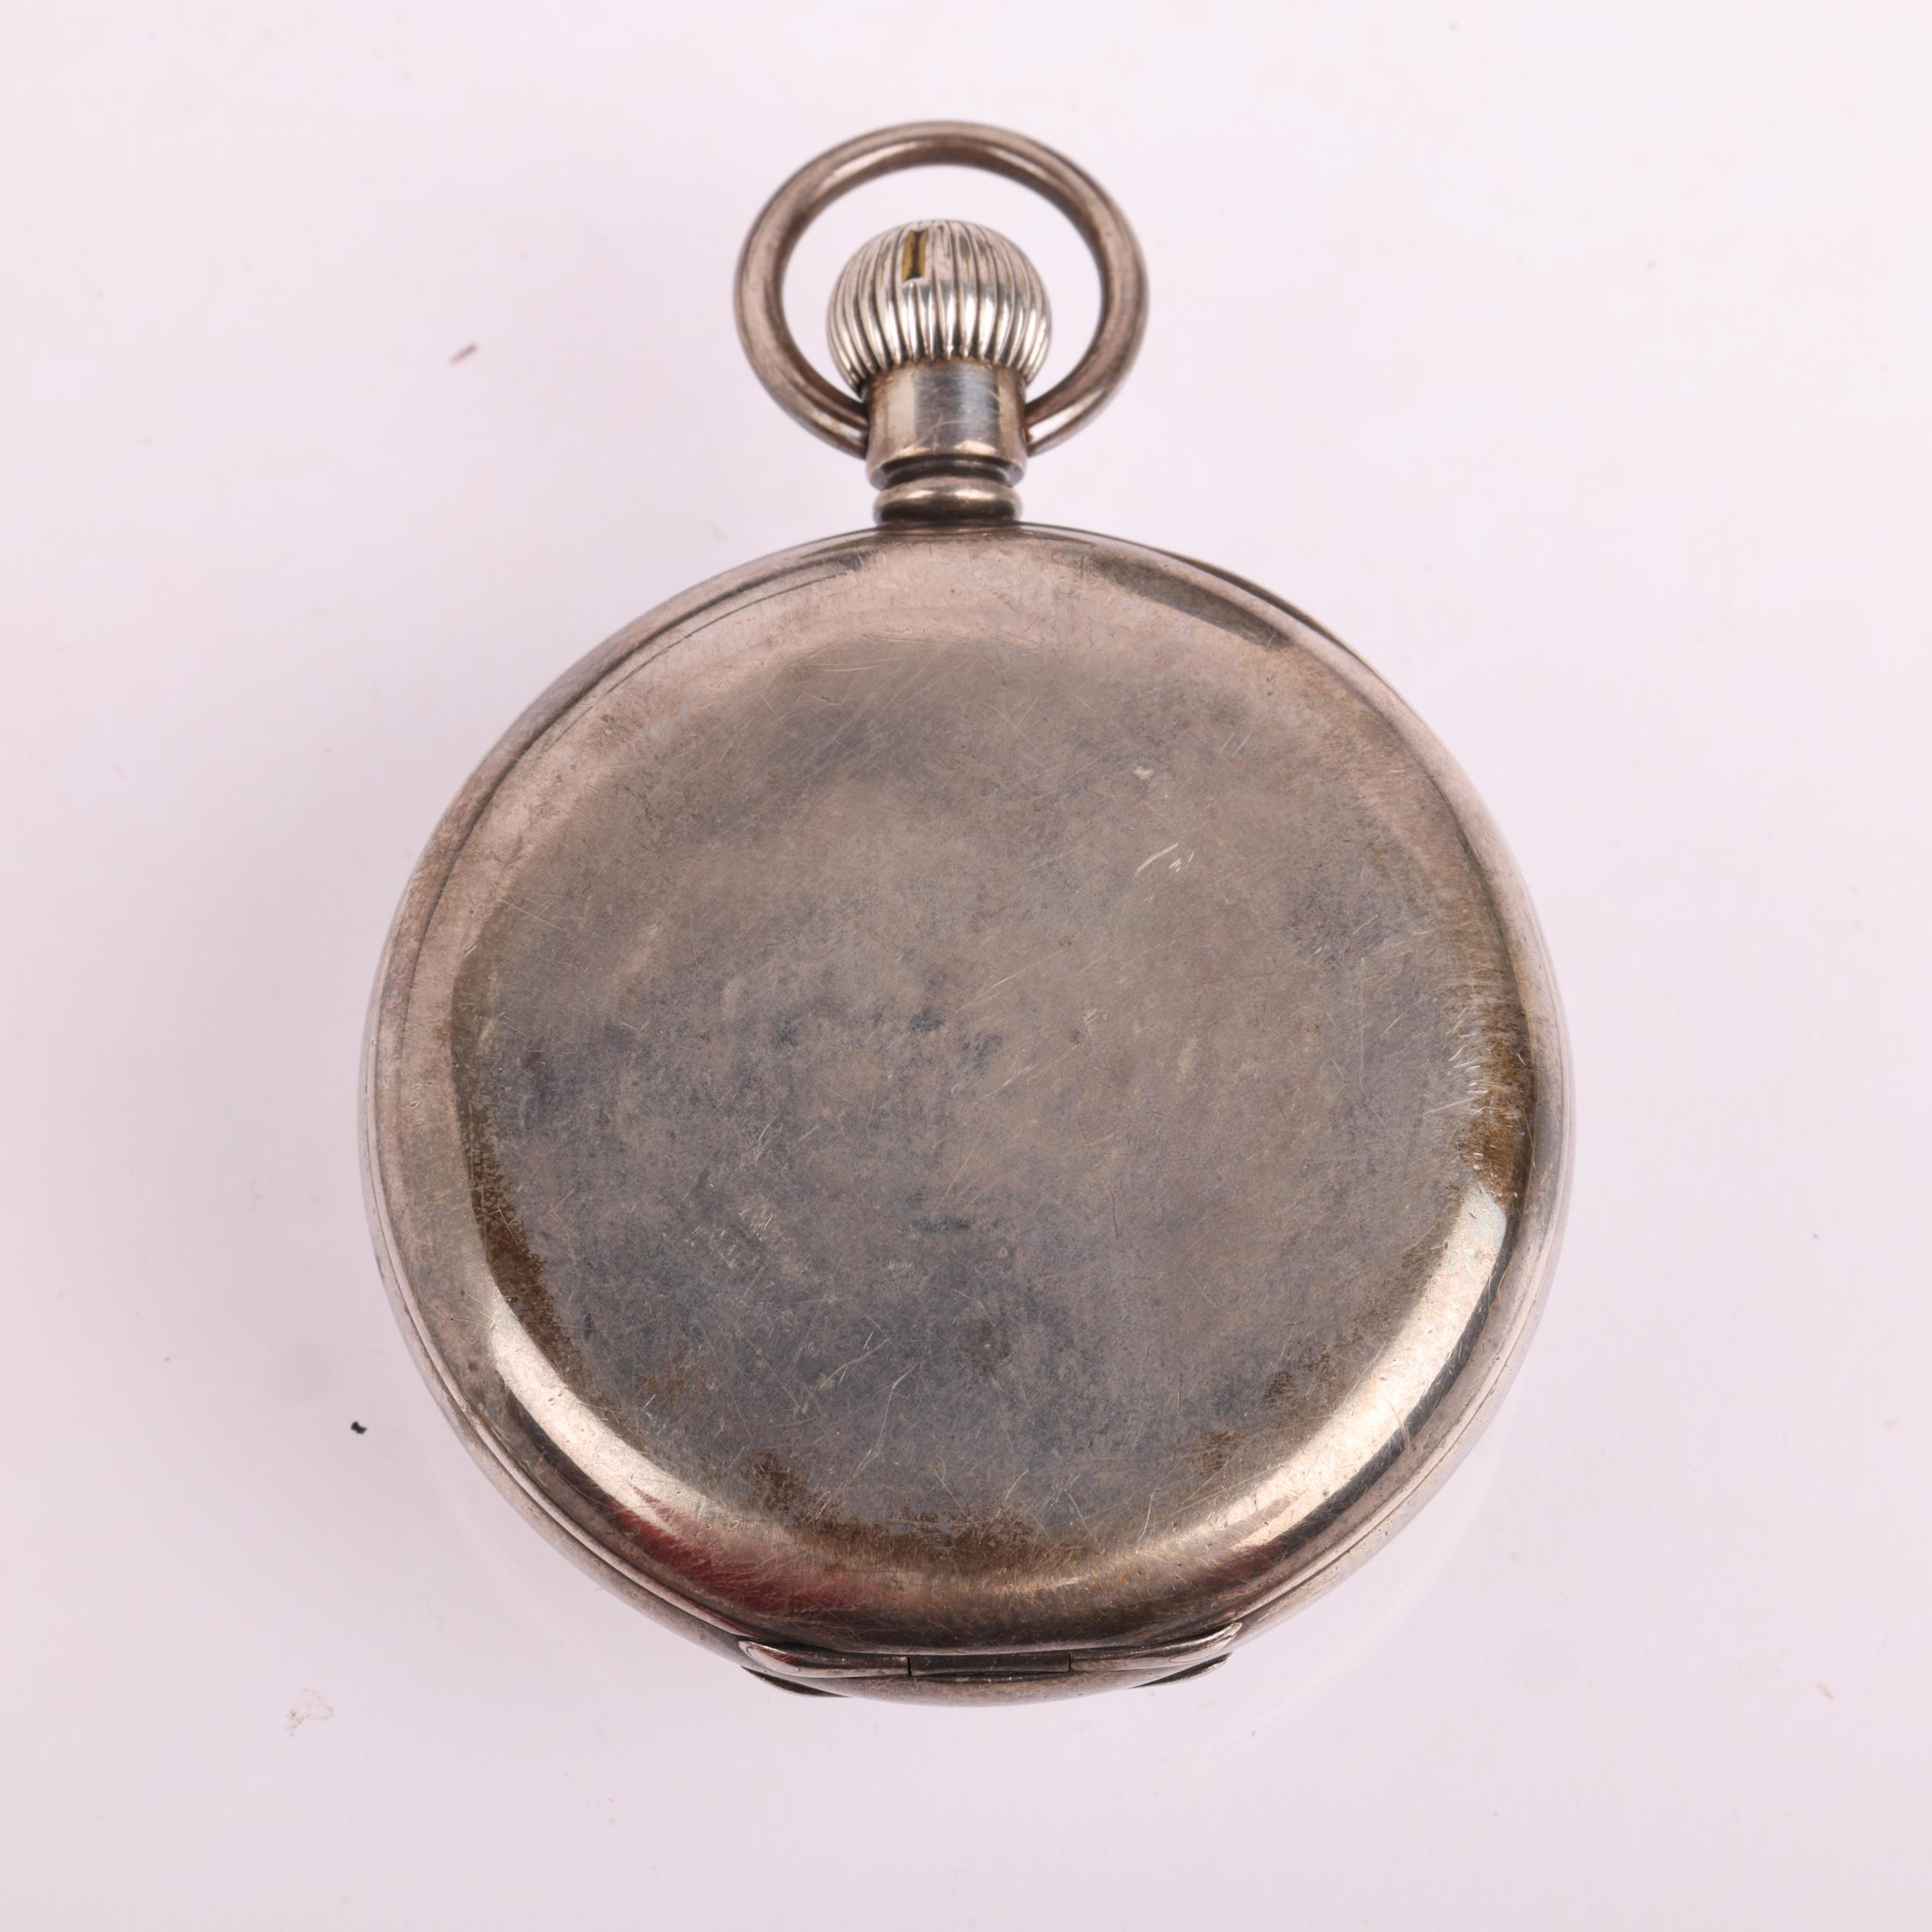 J W BENSON - an early 20th century silver open-face keyless pocket watch, white enamel dial with - Image 2 of 5